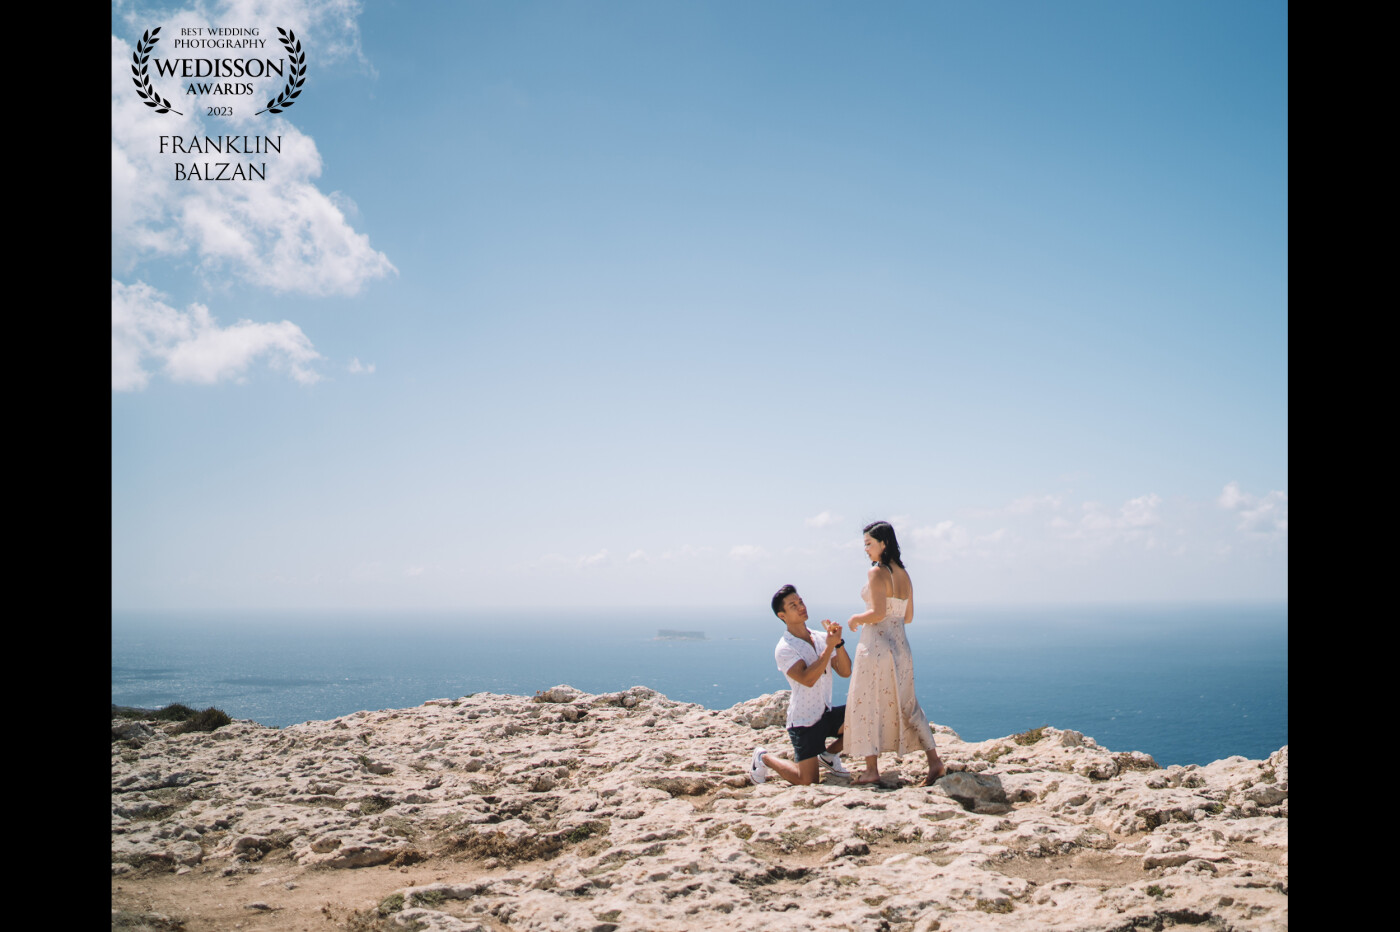 The proposal image is set against the stunning backdrop of Dingli Cliffs, which tower high above the crystal clear waters of the Mediterranean Sea. The couple stands at the edge of the cliffs,  framed against the breathtaking views of the ocean and the distant horizon.